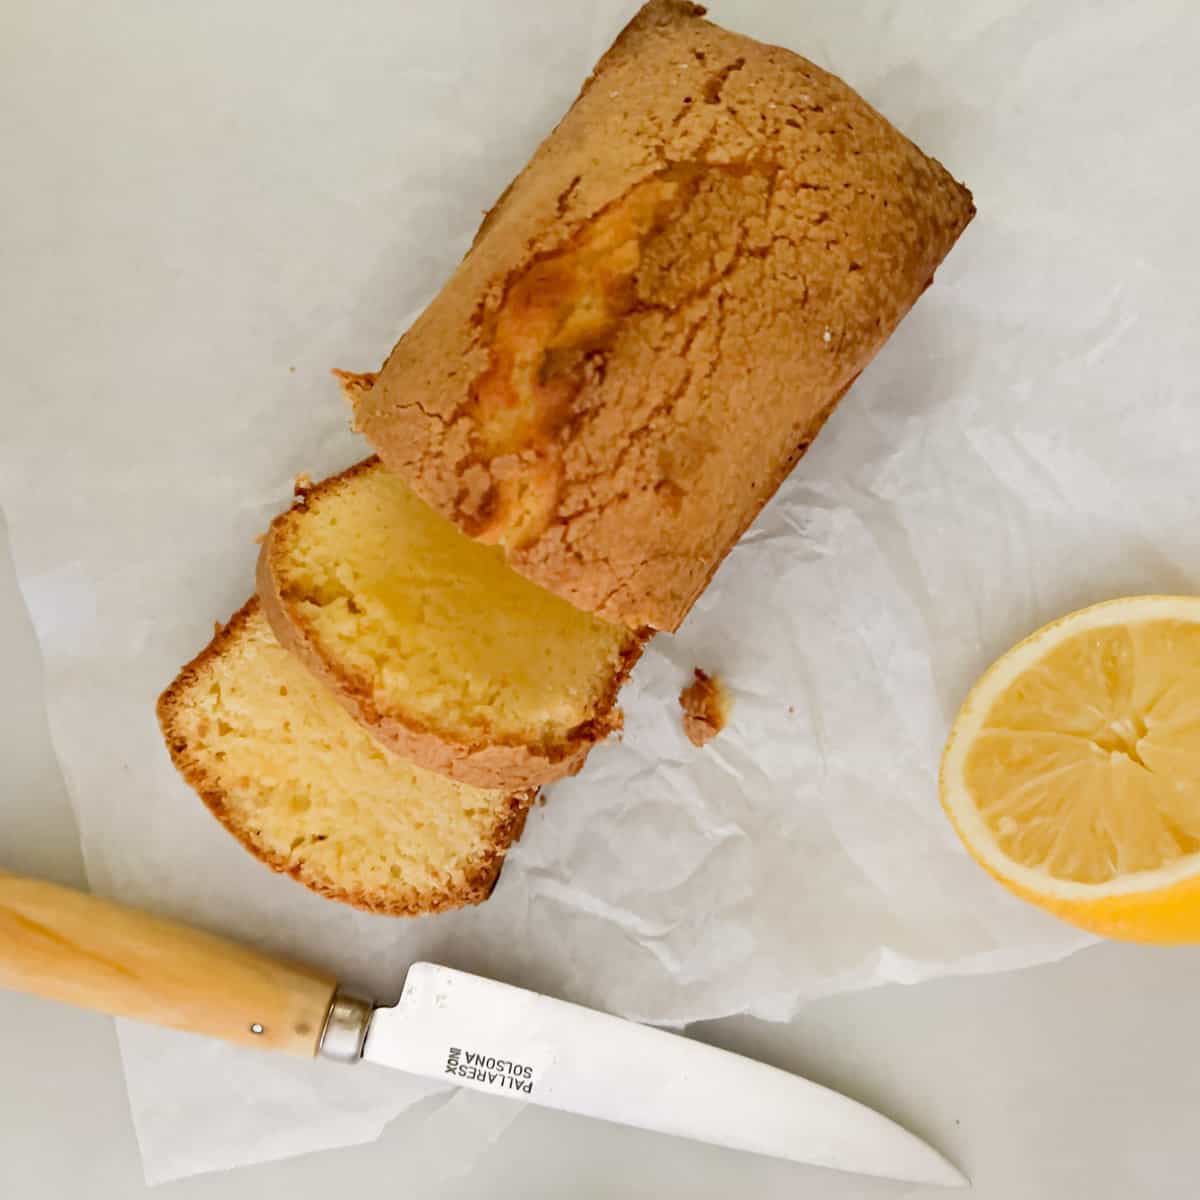 Small pound cake slices with half lemon and knife on parchment paper.